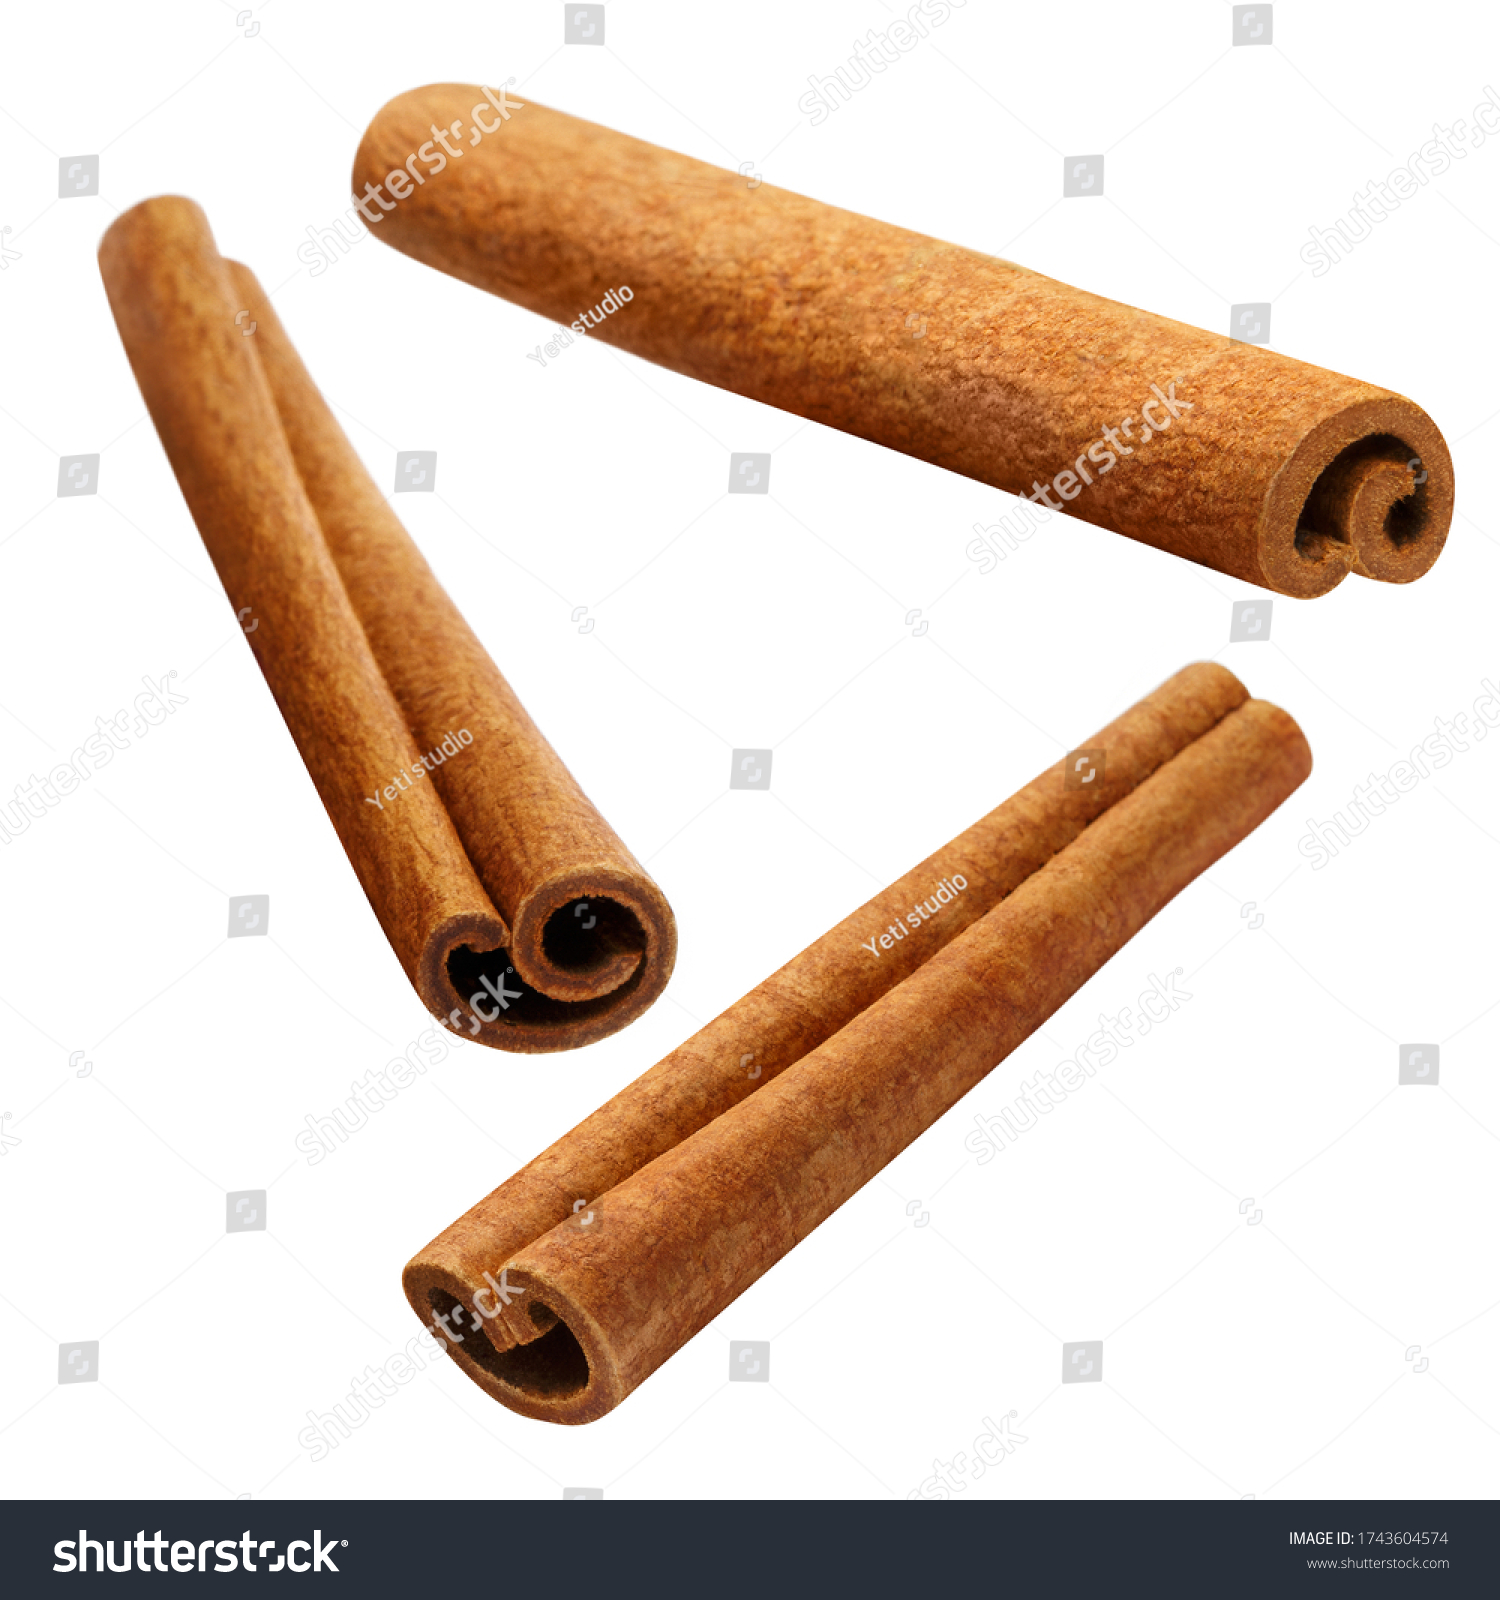 Flying delicious cinnamon sticks, isolated on white background #1743604574